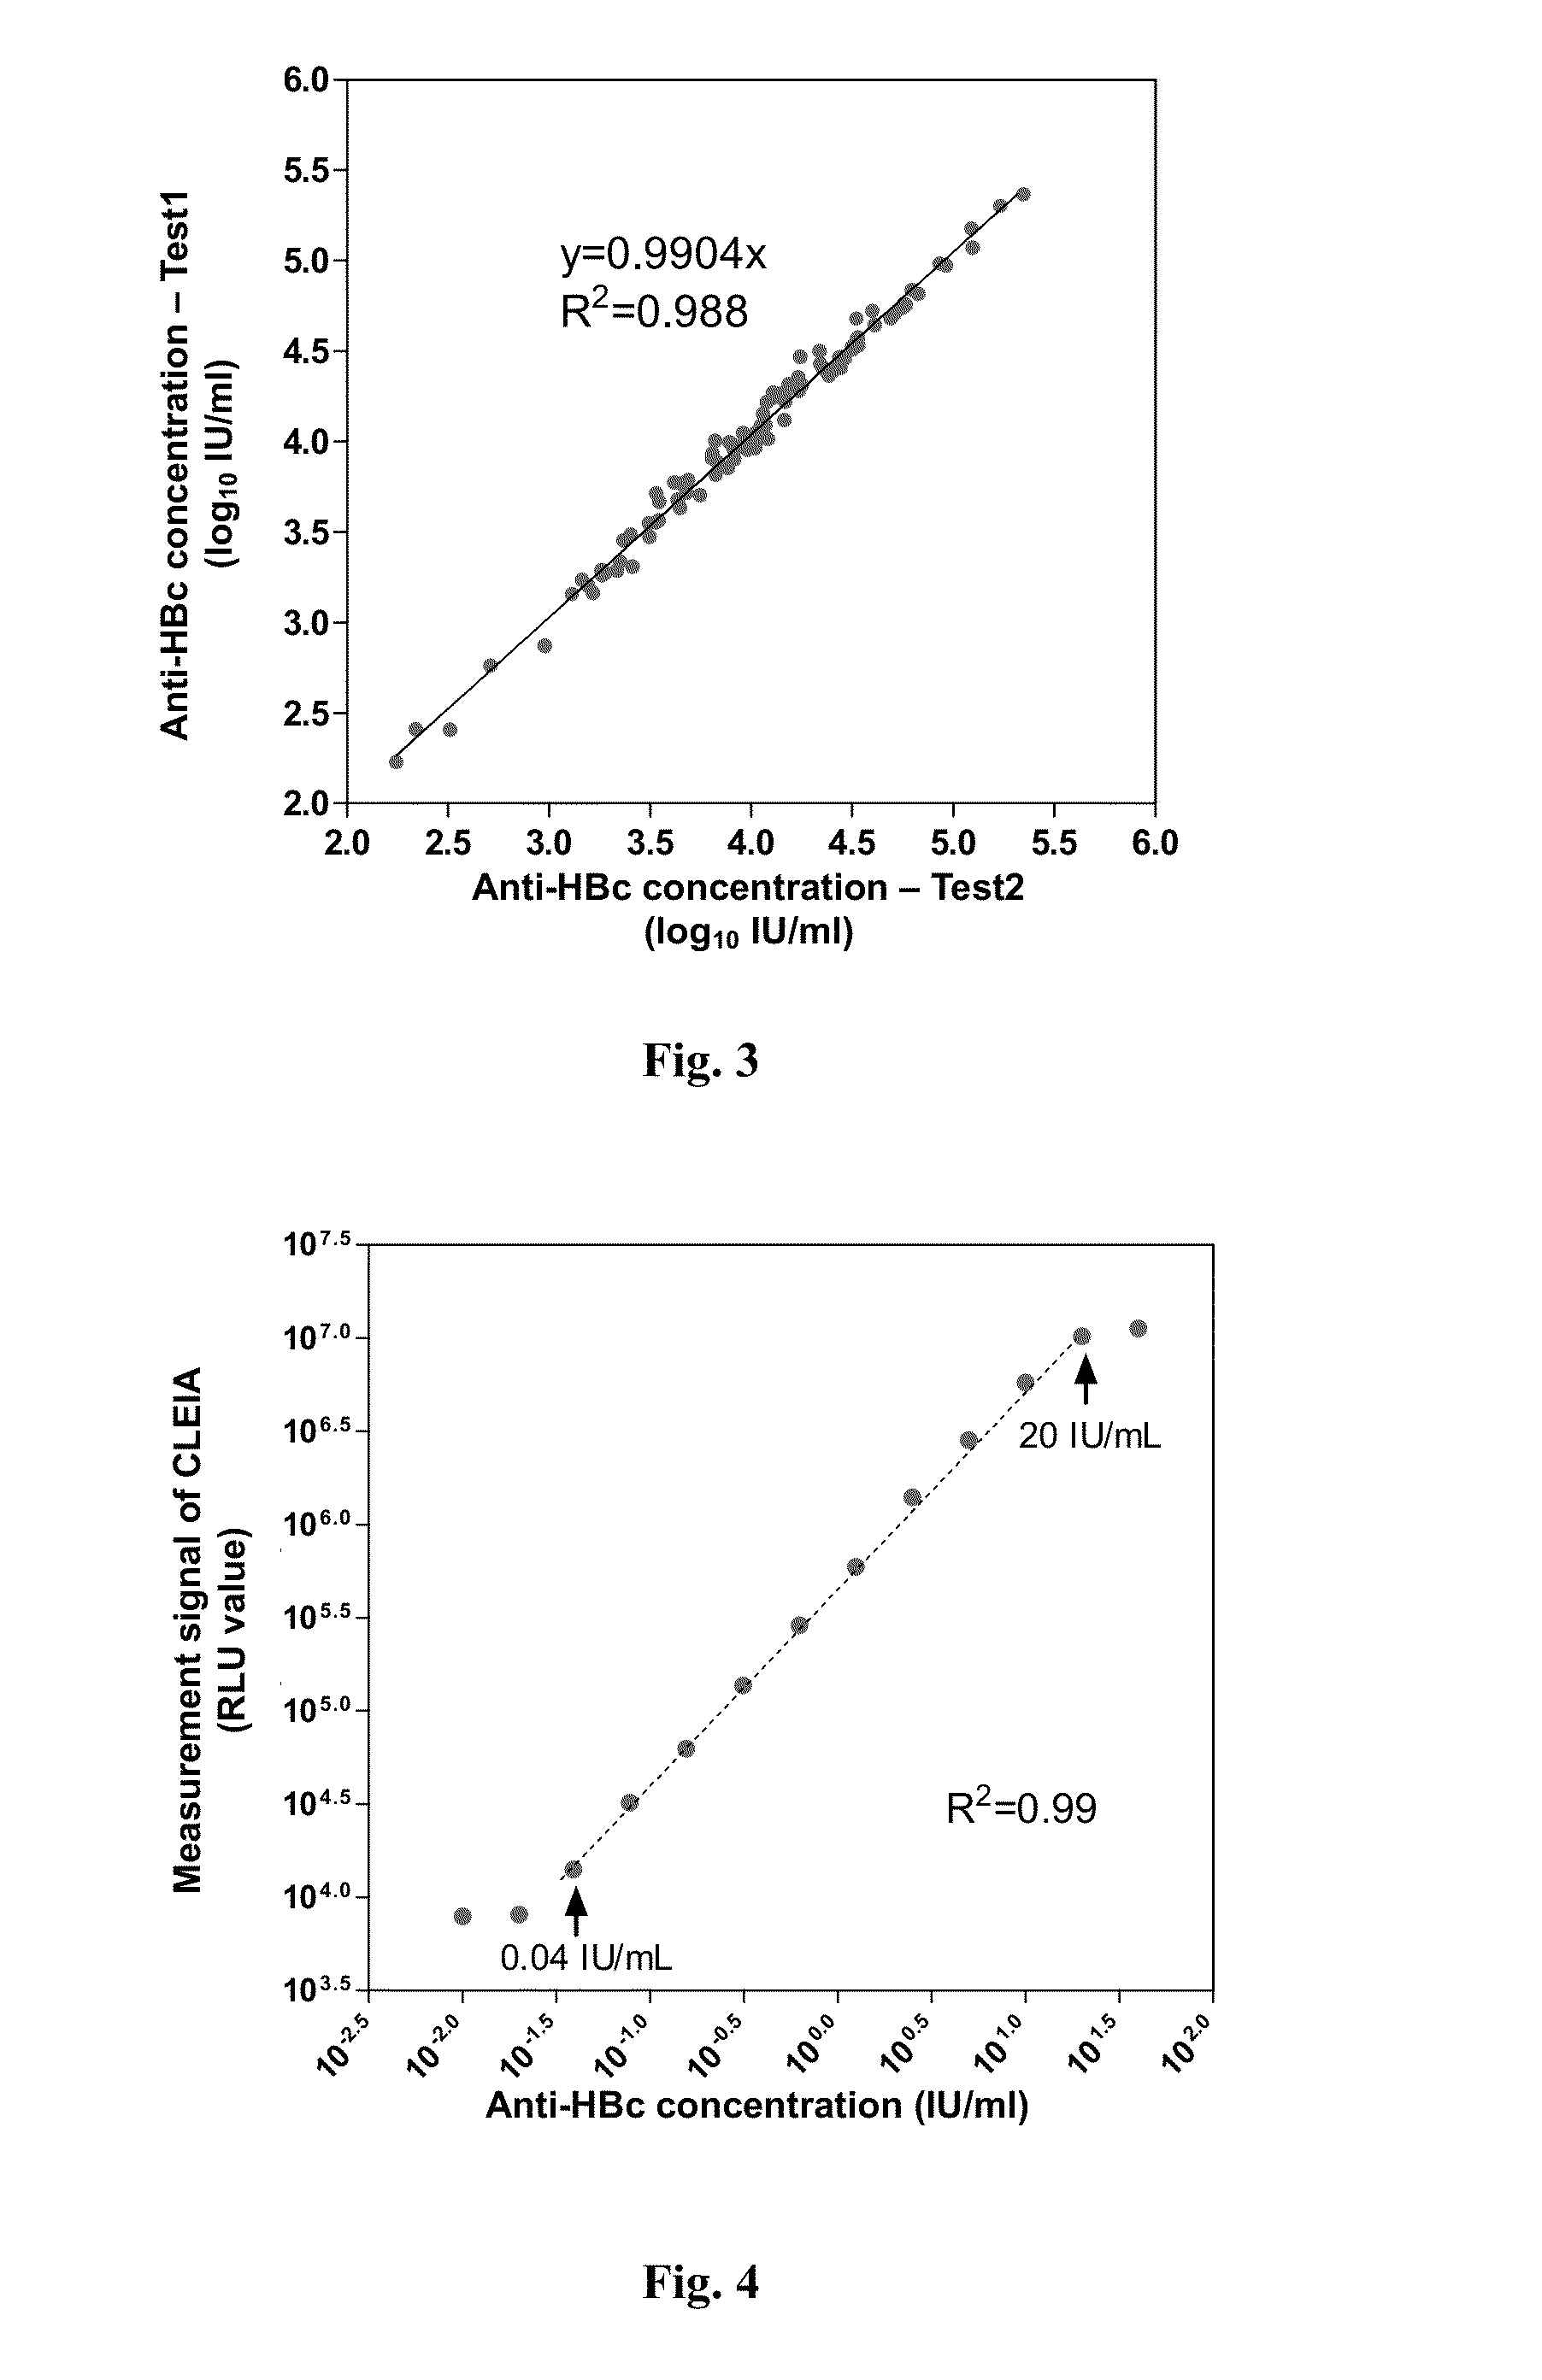 Anti-hbc quantitative detection method and uses thereof in monitoring and controlling disease progression of chronic hepatitis b patient and in predicting therapeutic effect